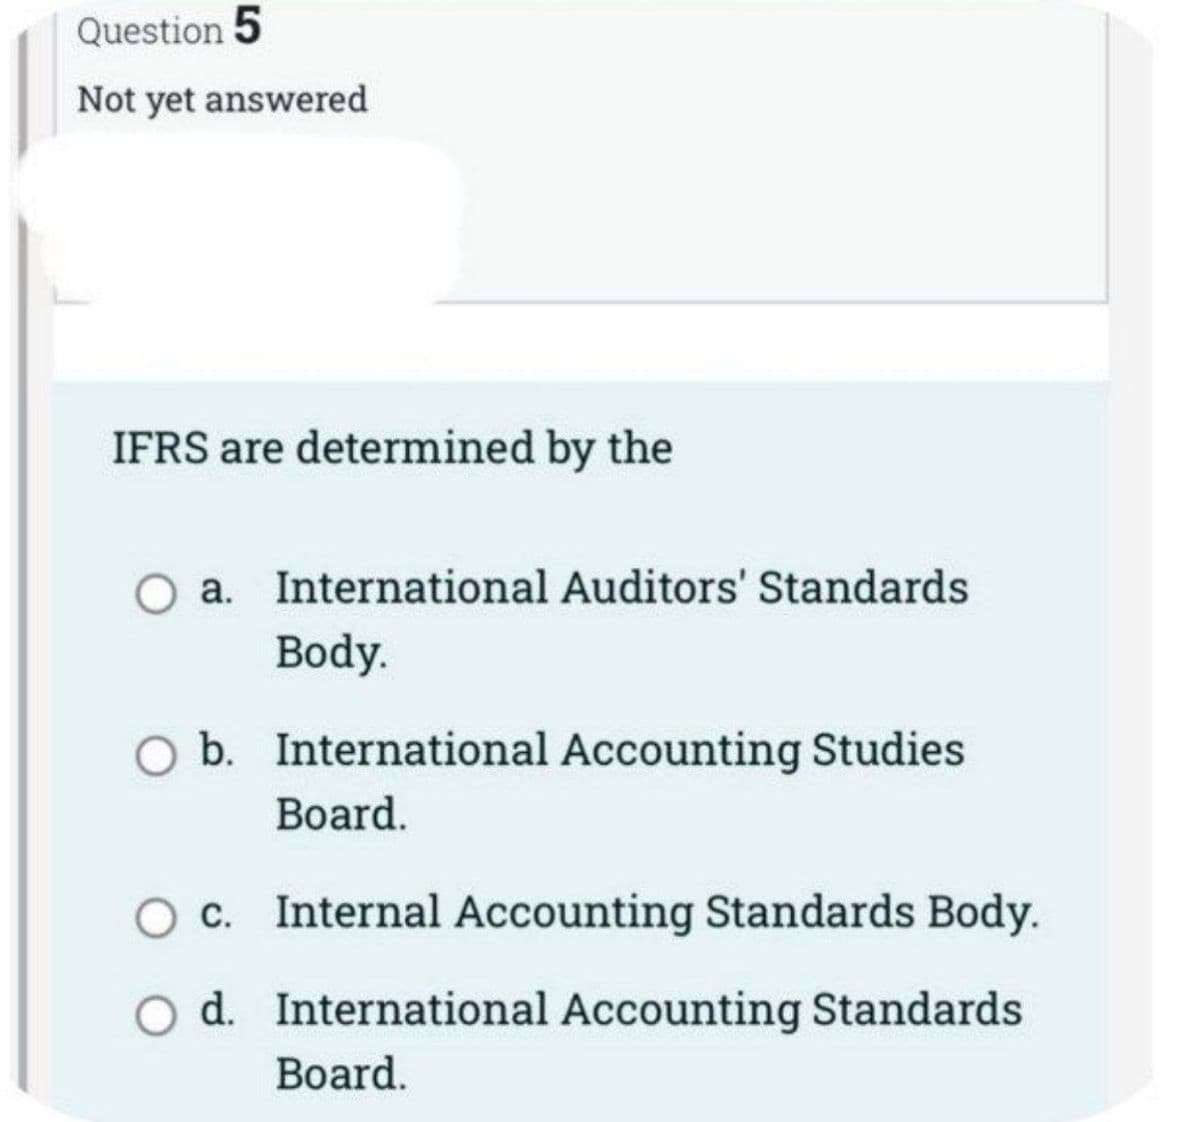 Question 5
Not yet answered
IFRS are determined by the
a. International Auditors' Standards
Body.
b. International Accounting Studies
Board.
c. Internal Accounting Standards Body.
O d. International Accounting Standards
Board.